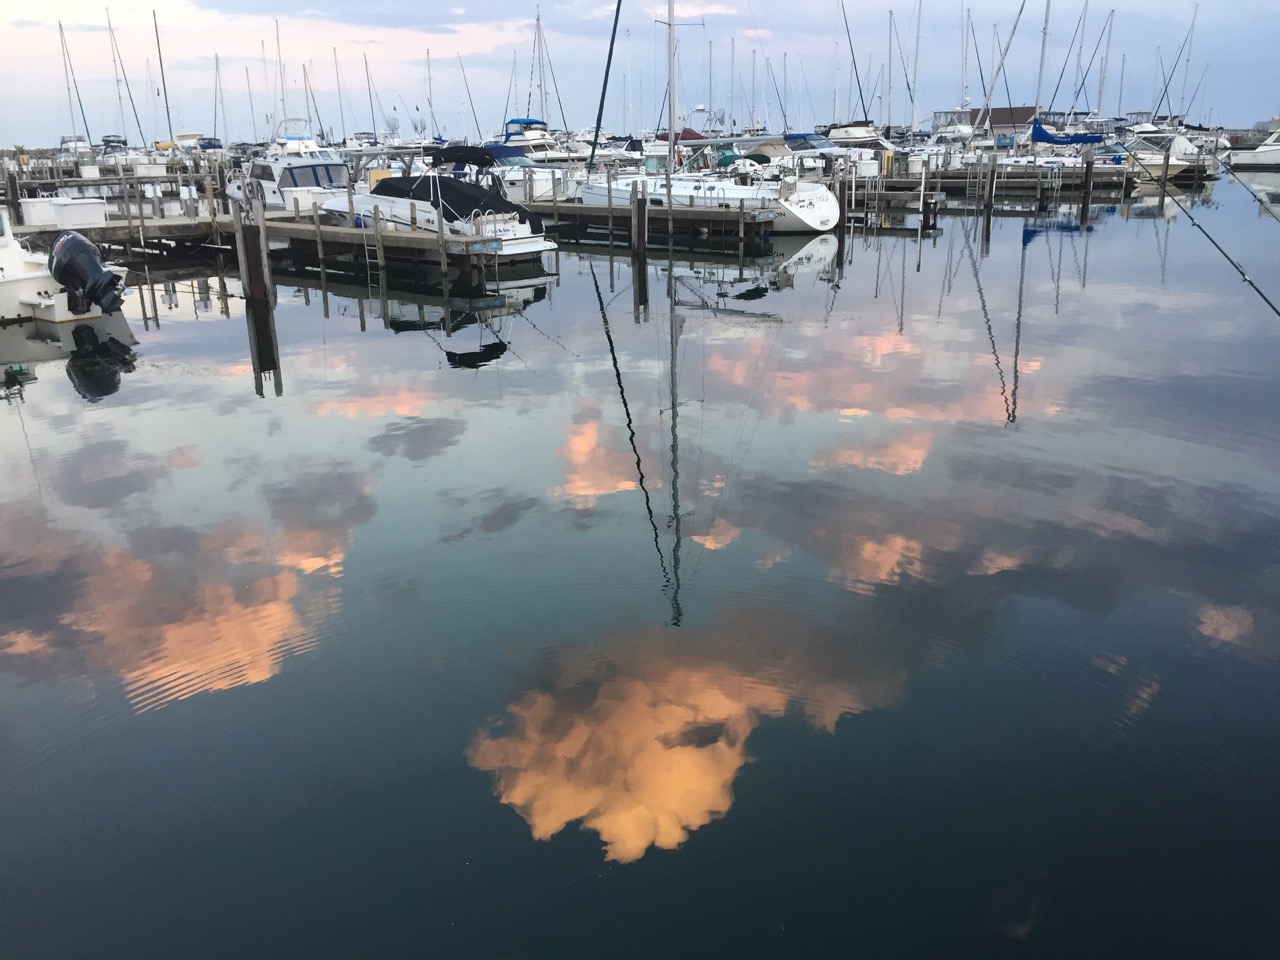 clouds reflected on the water in Waukegan Harbor